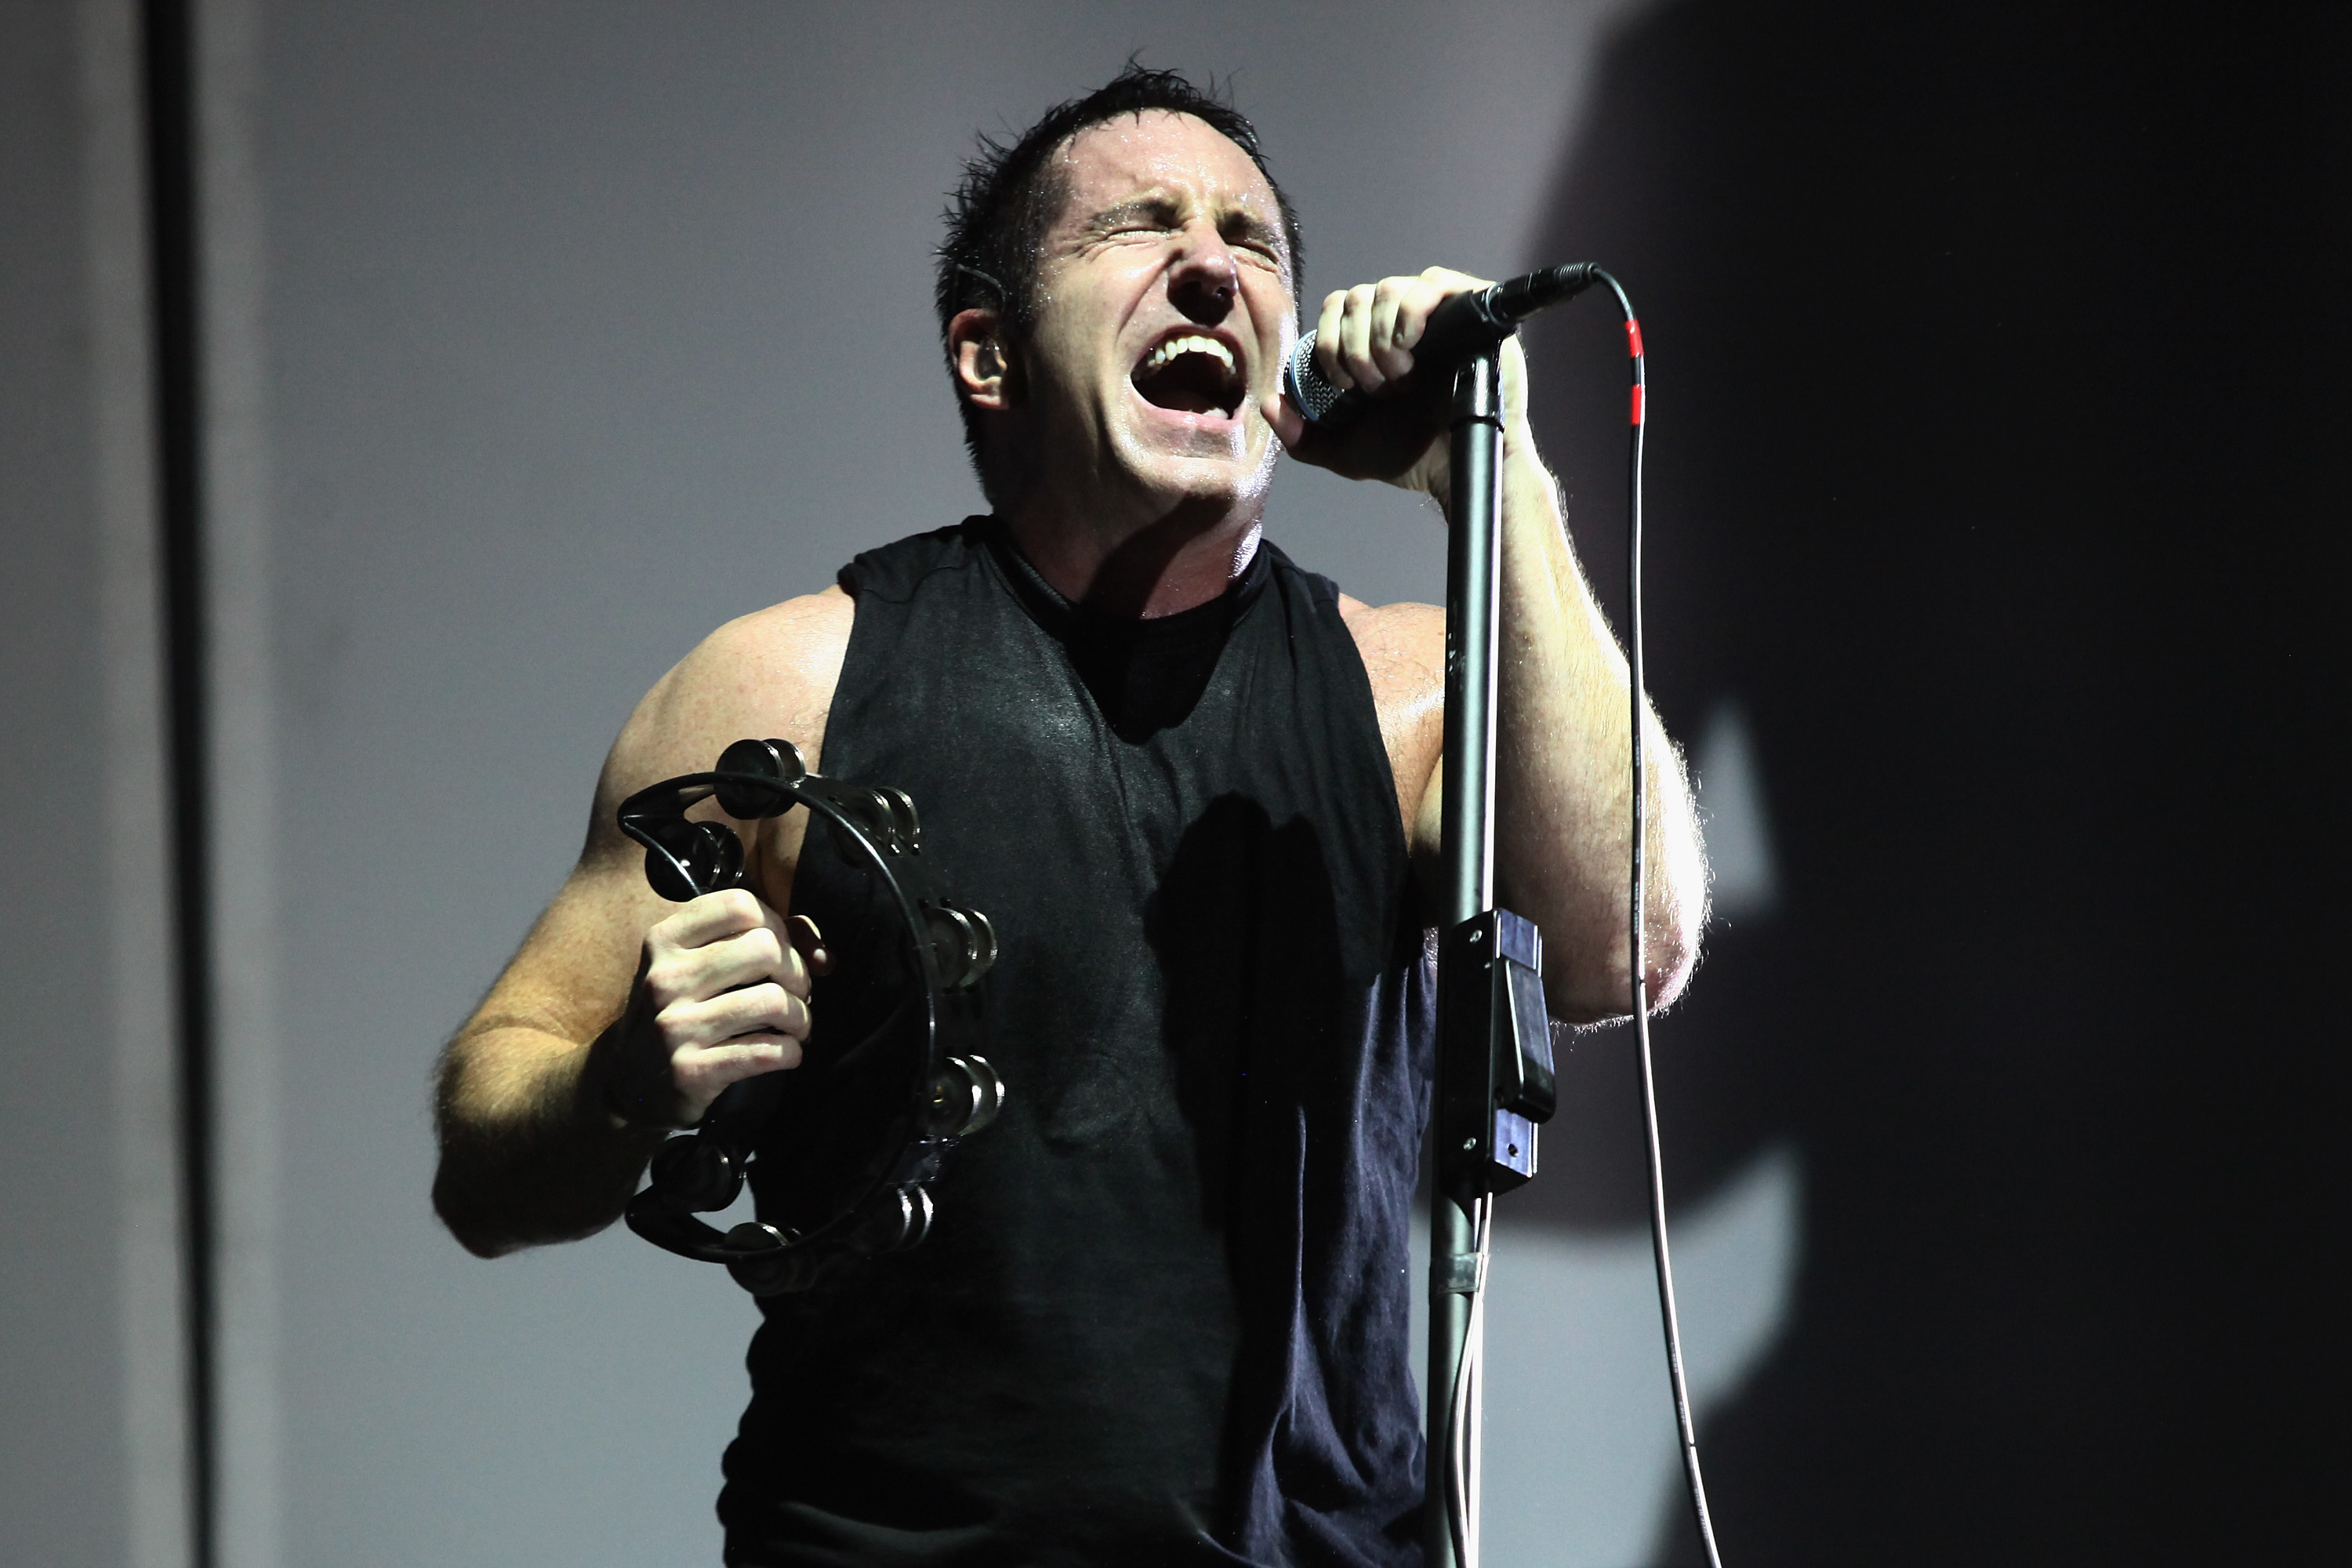 CHICAGO, IL - AUGUST 02:  (FOR EDITORIAL USE ONLY) Trent Reznor of Nine Inch Nails performs during Lollapalooza 2013 at Grant